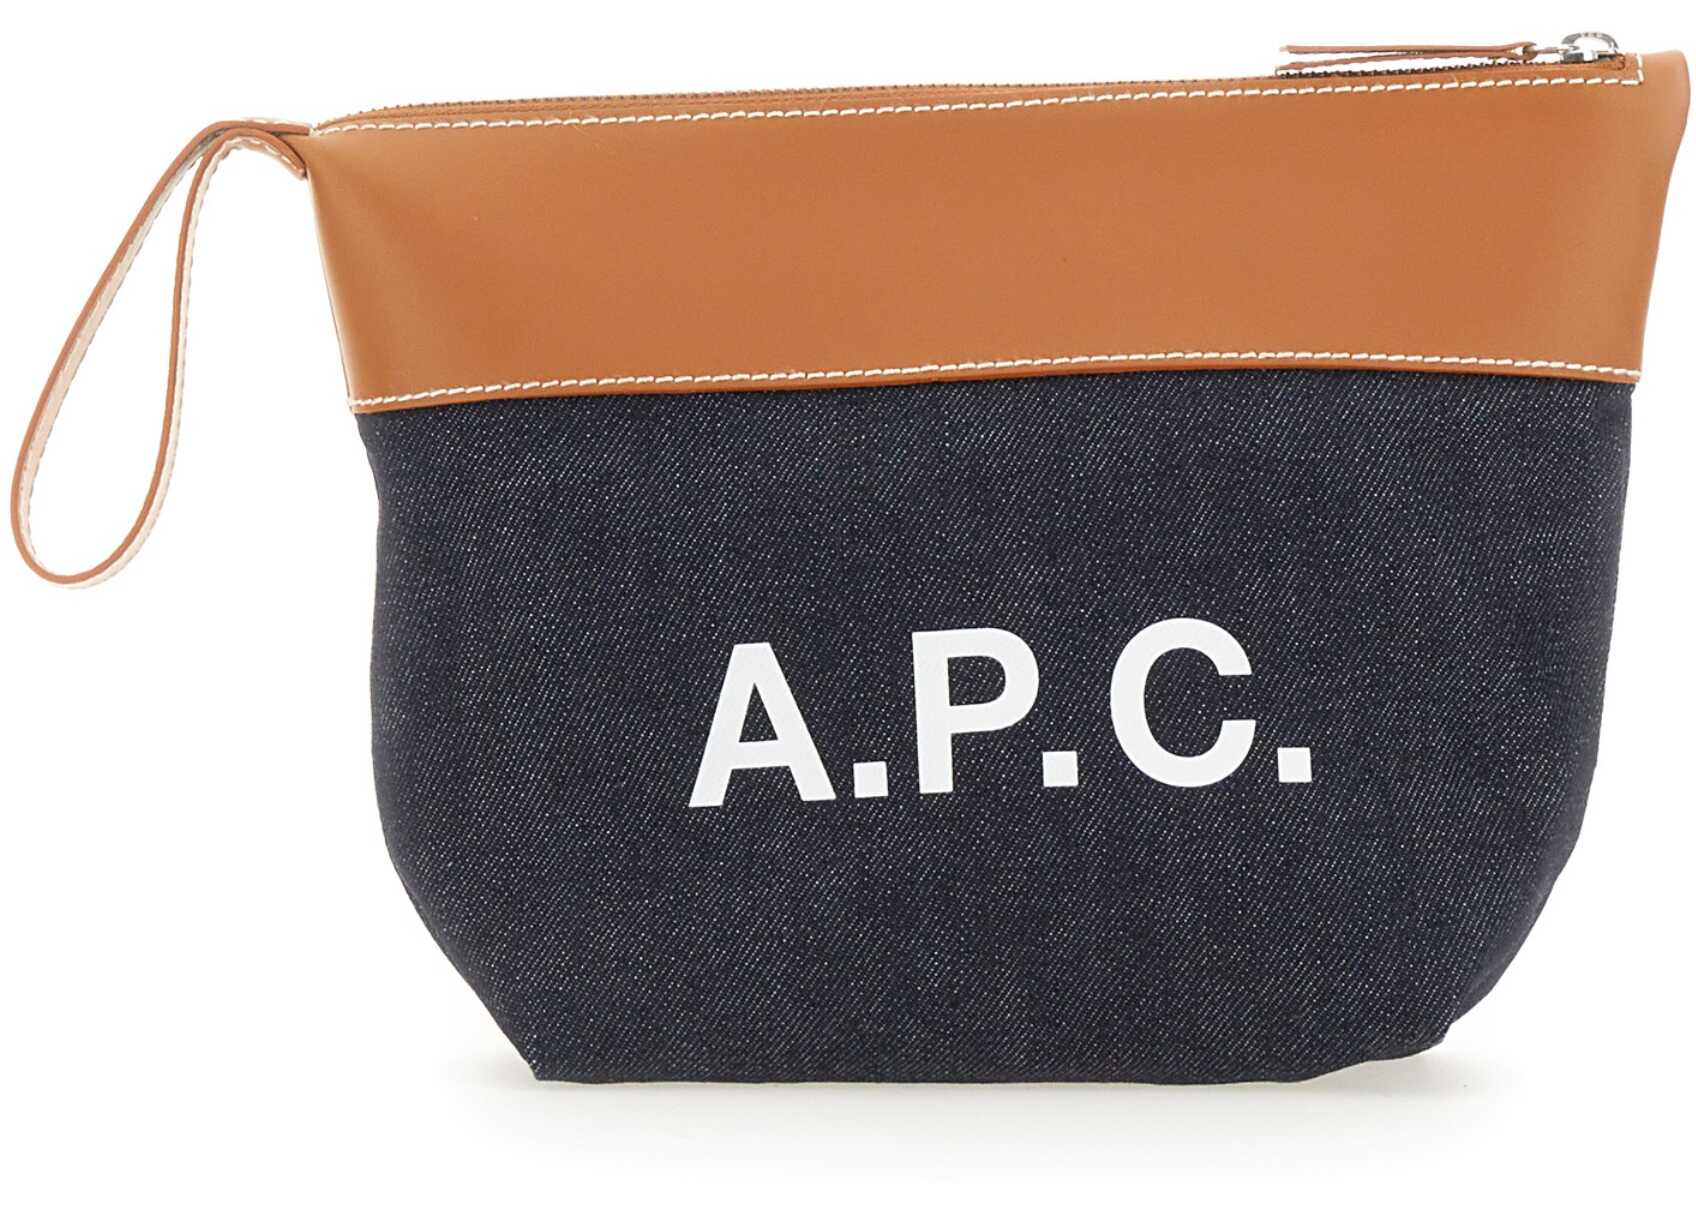 A.P.C. Axel Clutch With Print BROWN